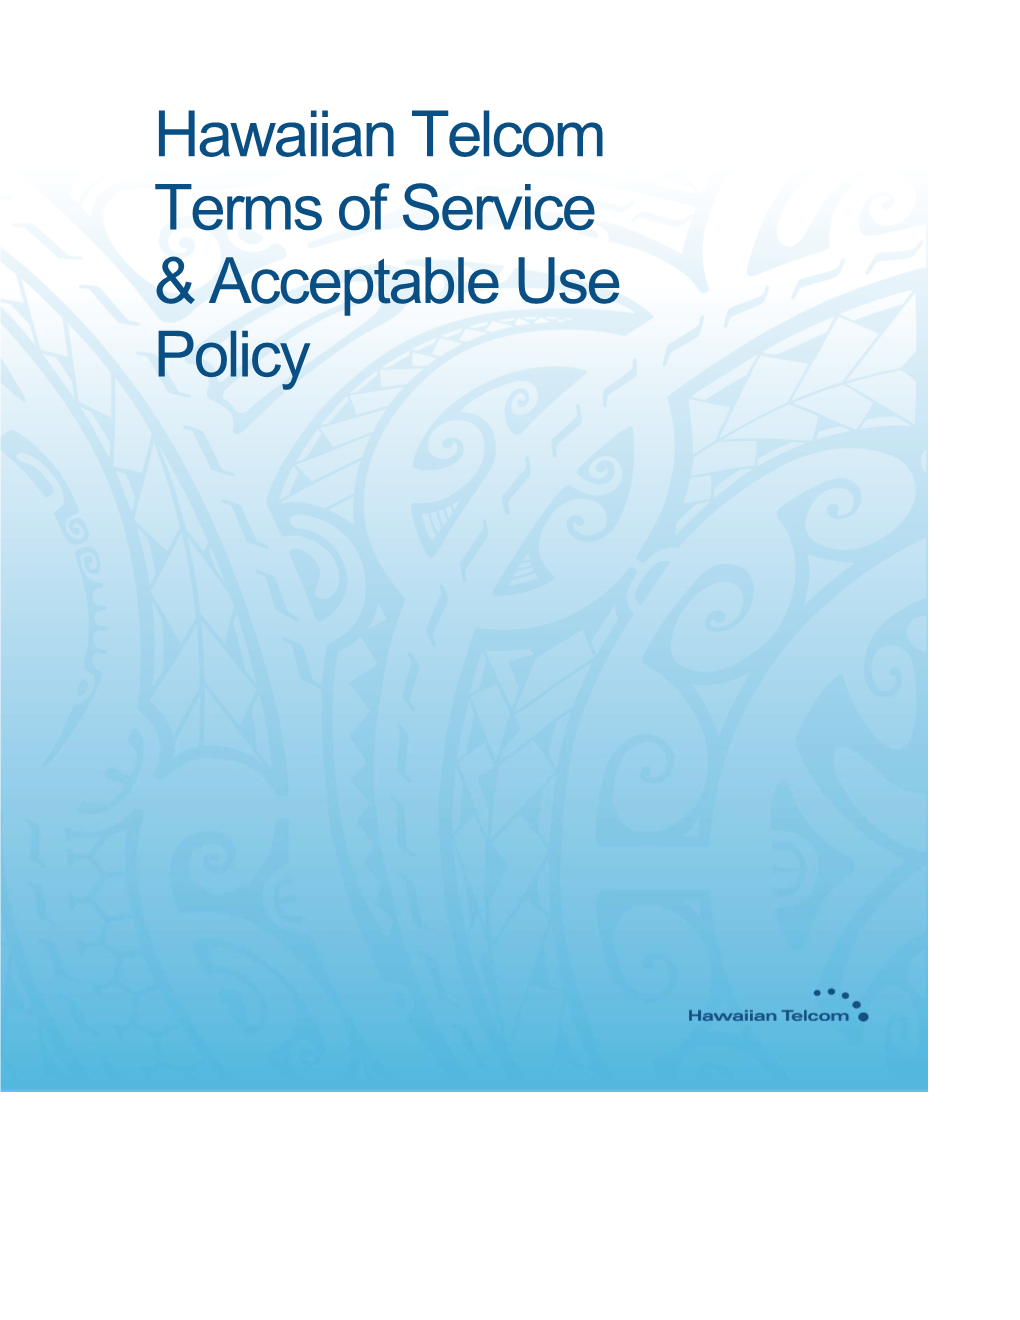 Hawaiian Telcom Terms of Service & Acceptable Use Policy